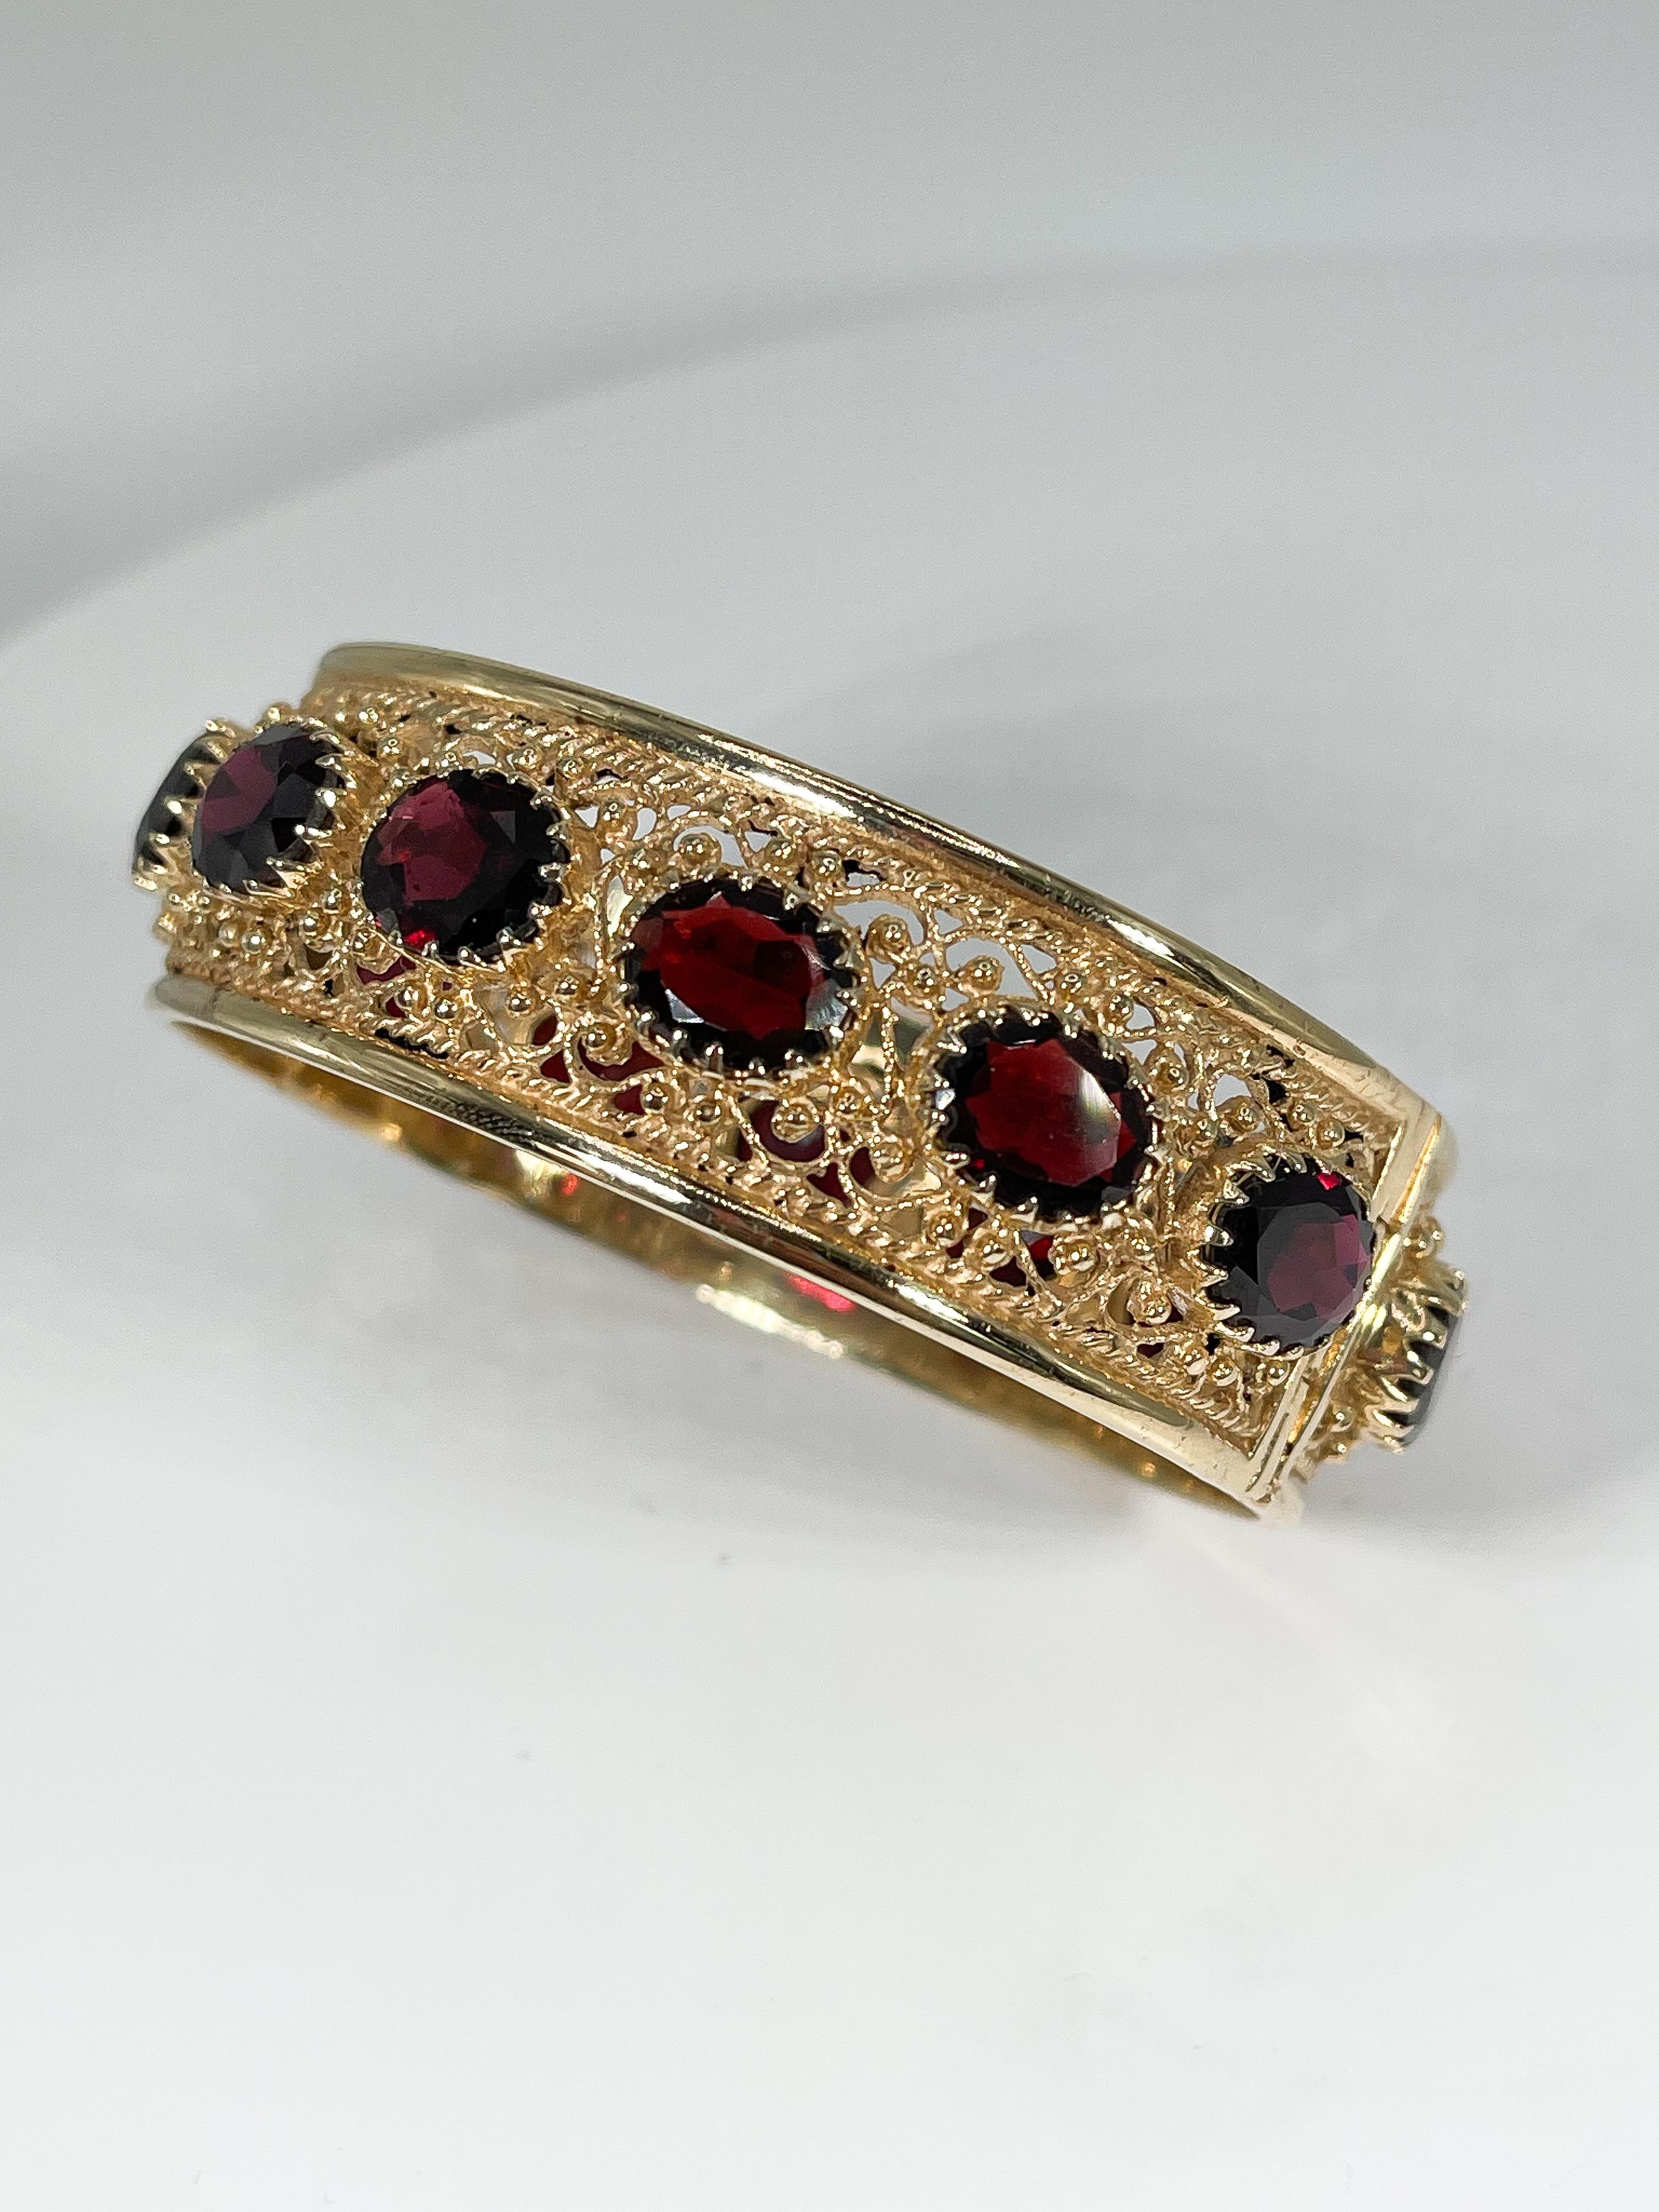 Fancy 14k yellow gold wide bangle with 14 8x10 oval Mozambique garnets. The bangle has a figure 8 clasp and push button to open for wearing. Has an inside diameter of about 7 3/4'' and a weight of 55.6 grams.